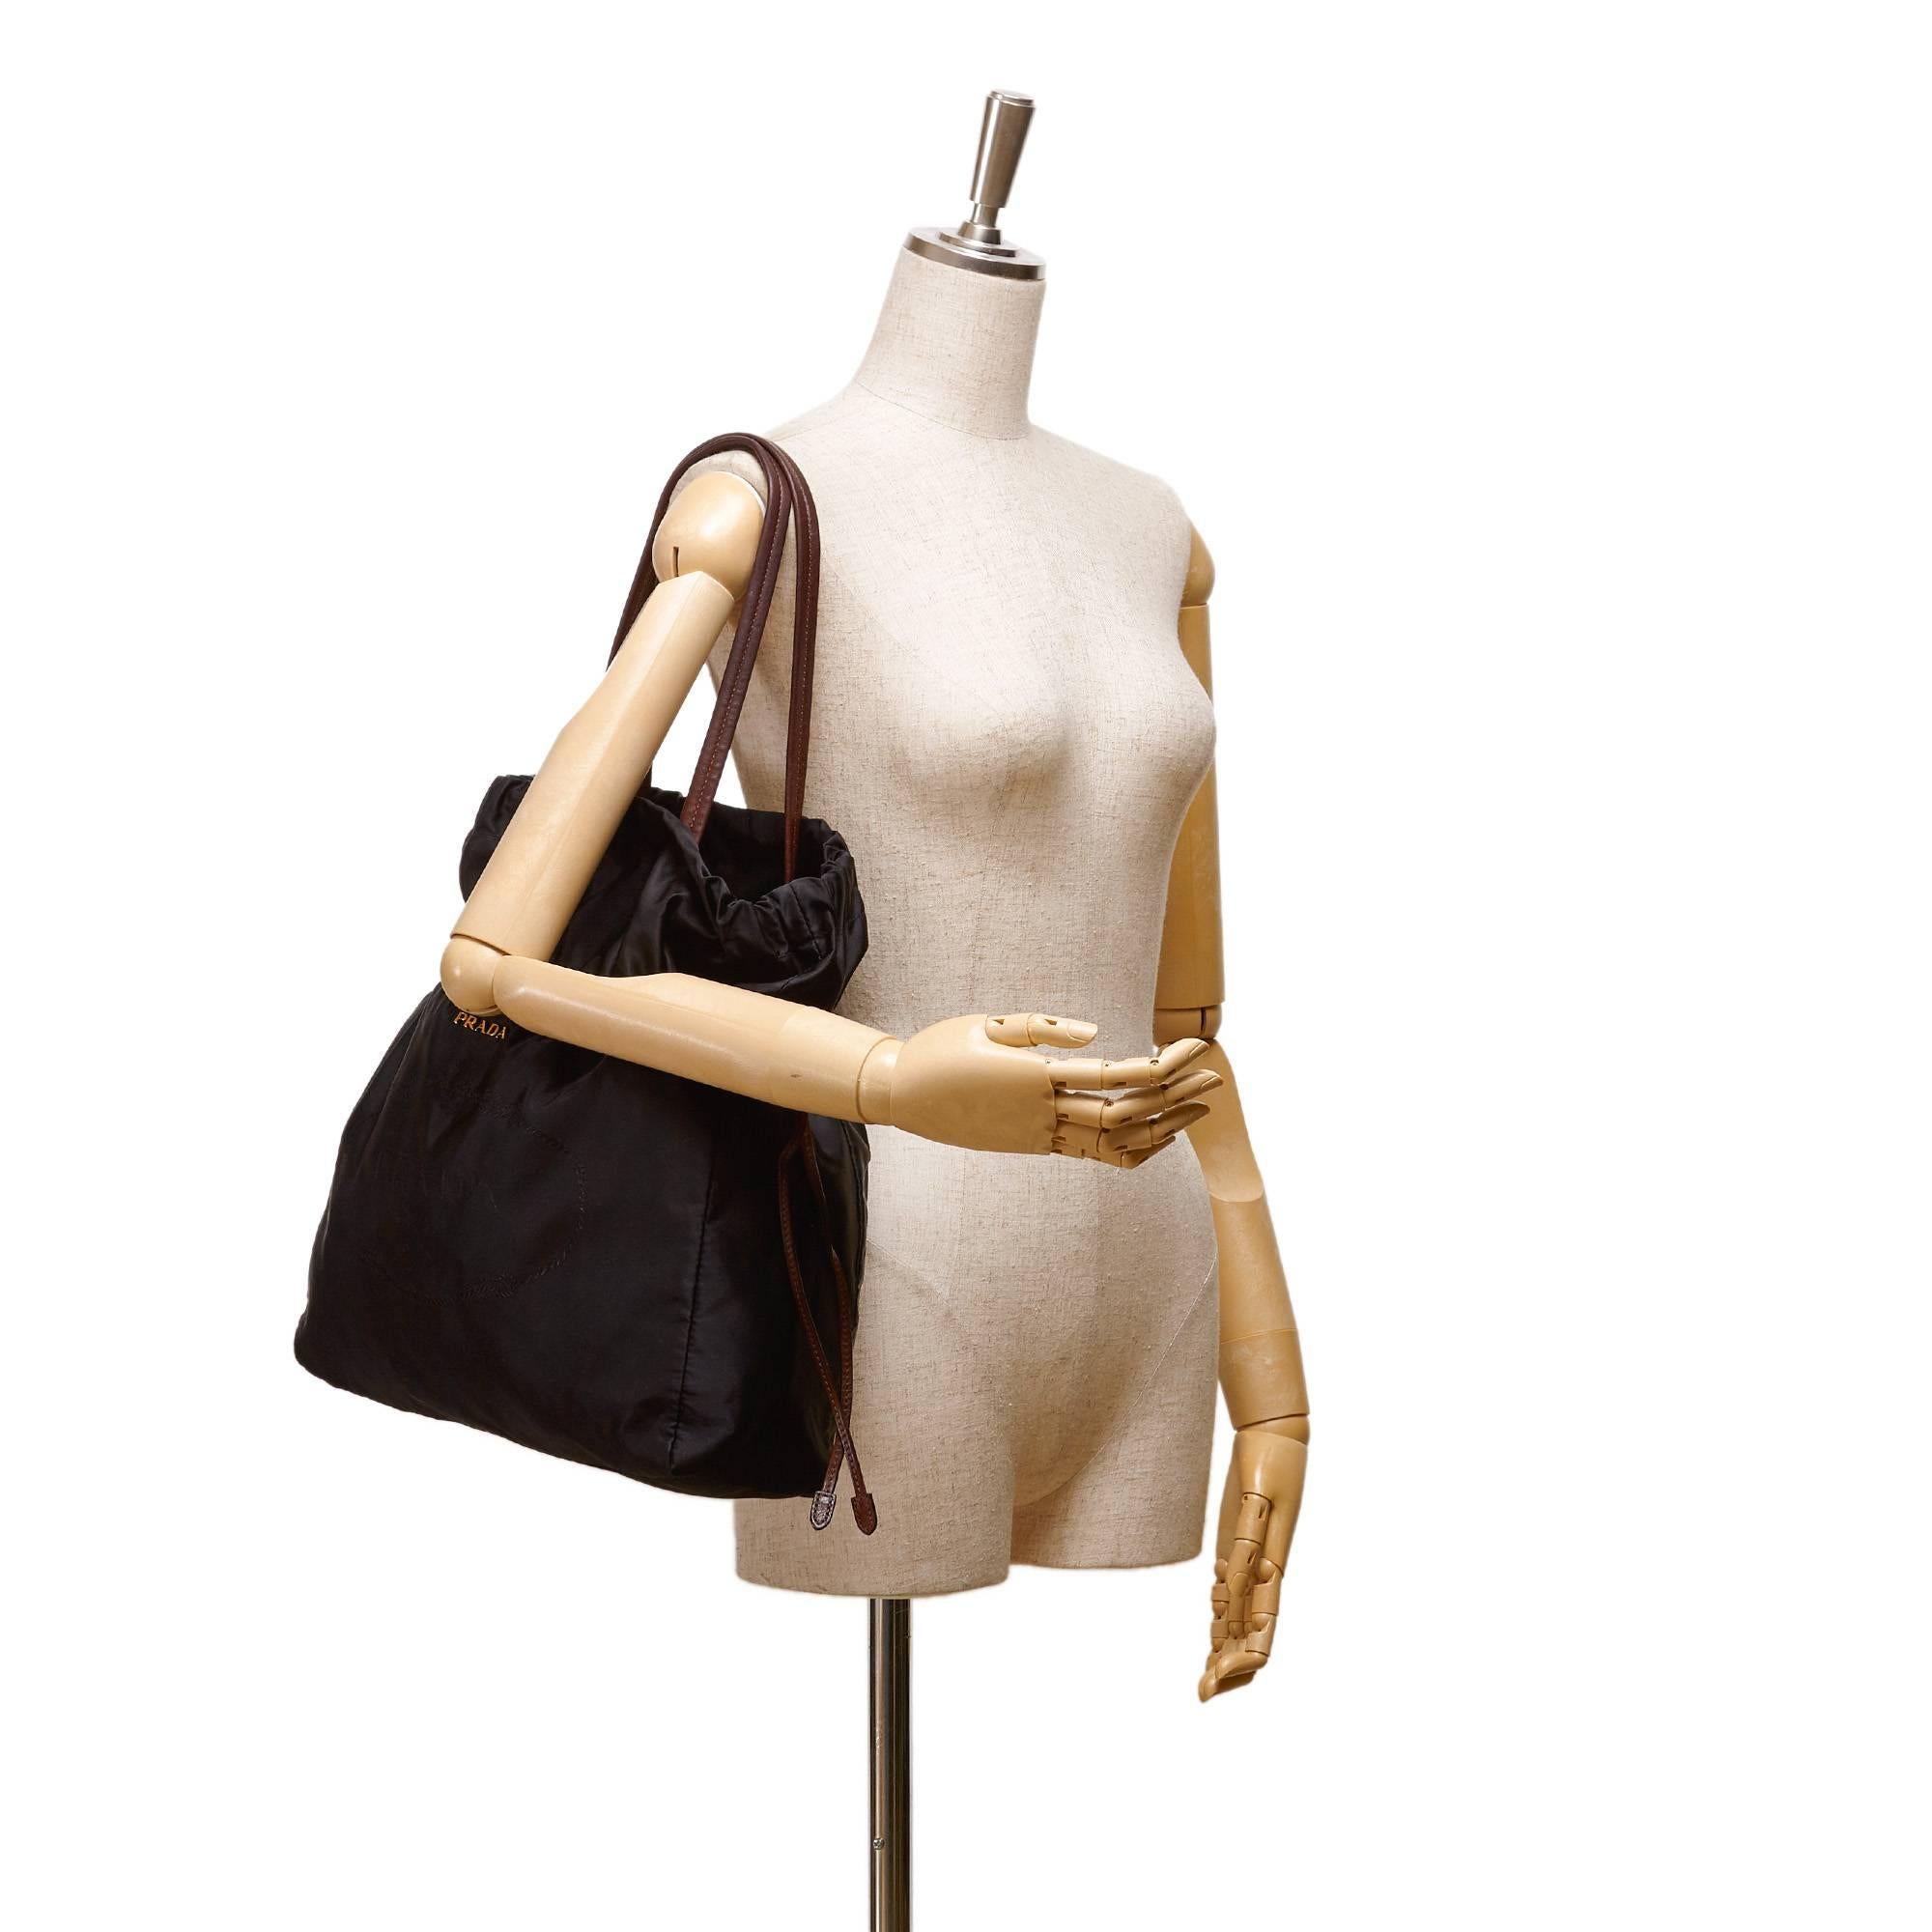 - This Prada black tote bag features a nylon body, flat brown leather straps, drawstring closure, and interior zip pocket. A very chic and lightweight to carry tote bag for daily use. 

- Made in Italy. 

- Size: 37cm x 38.5cm x 11cm. Handle and